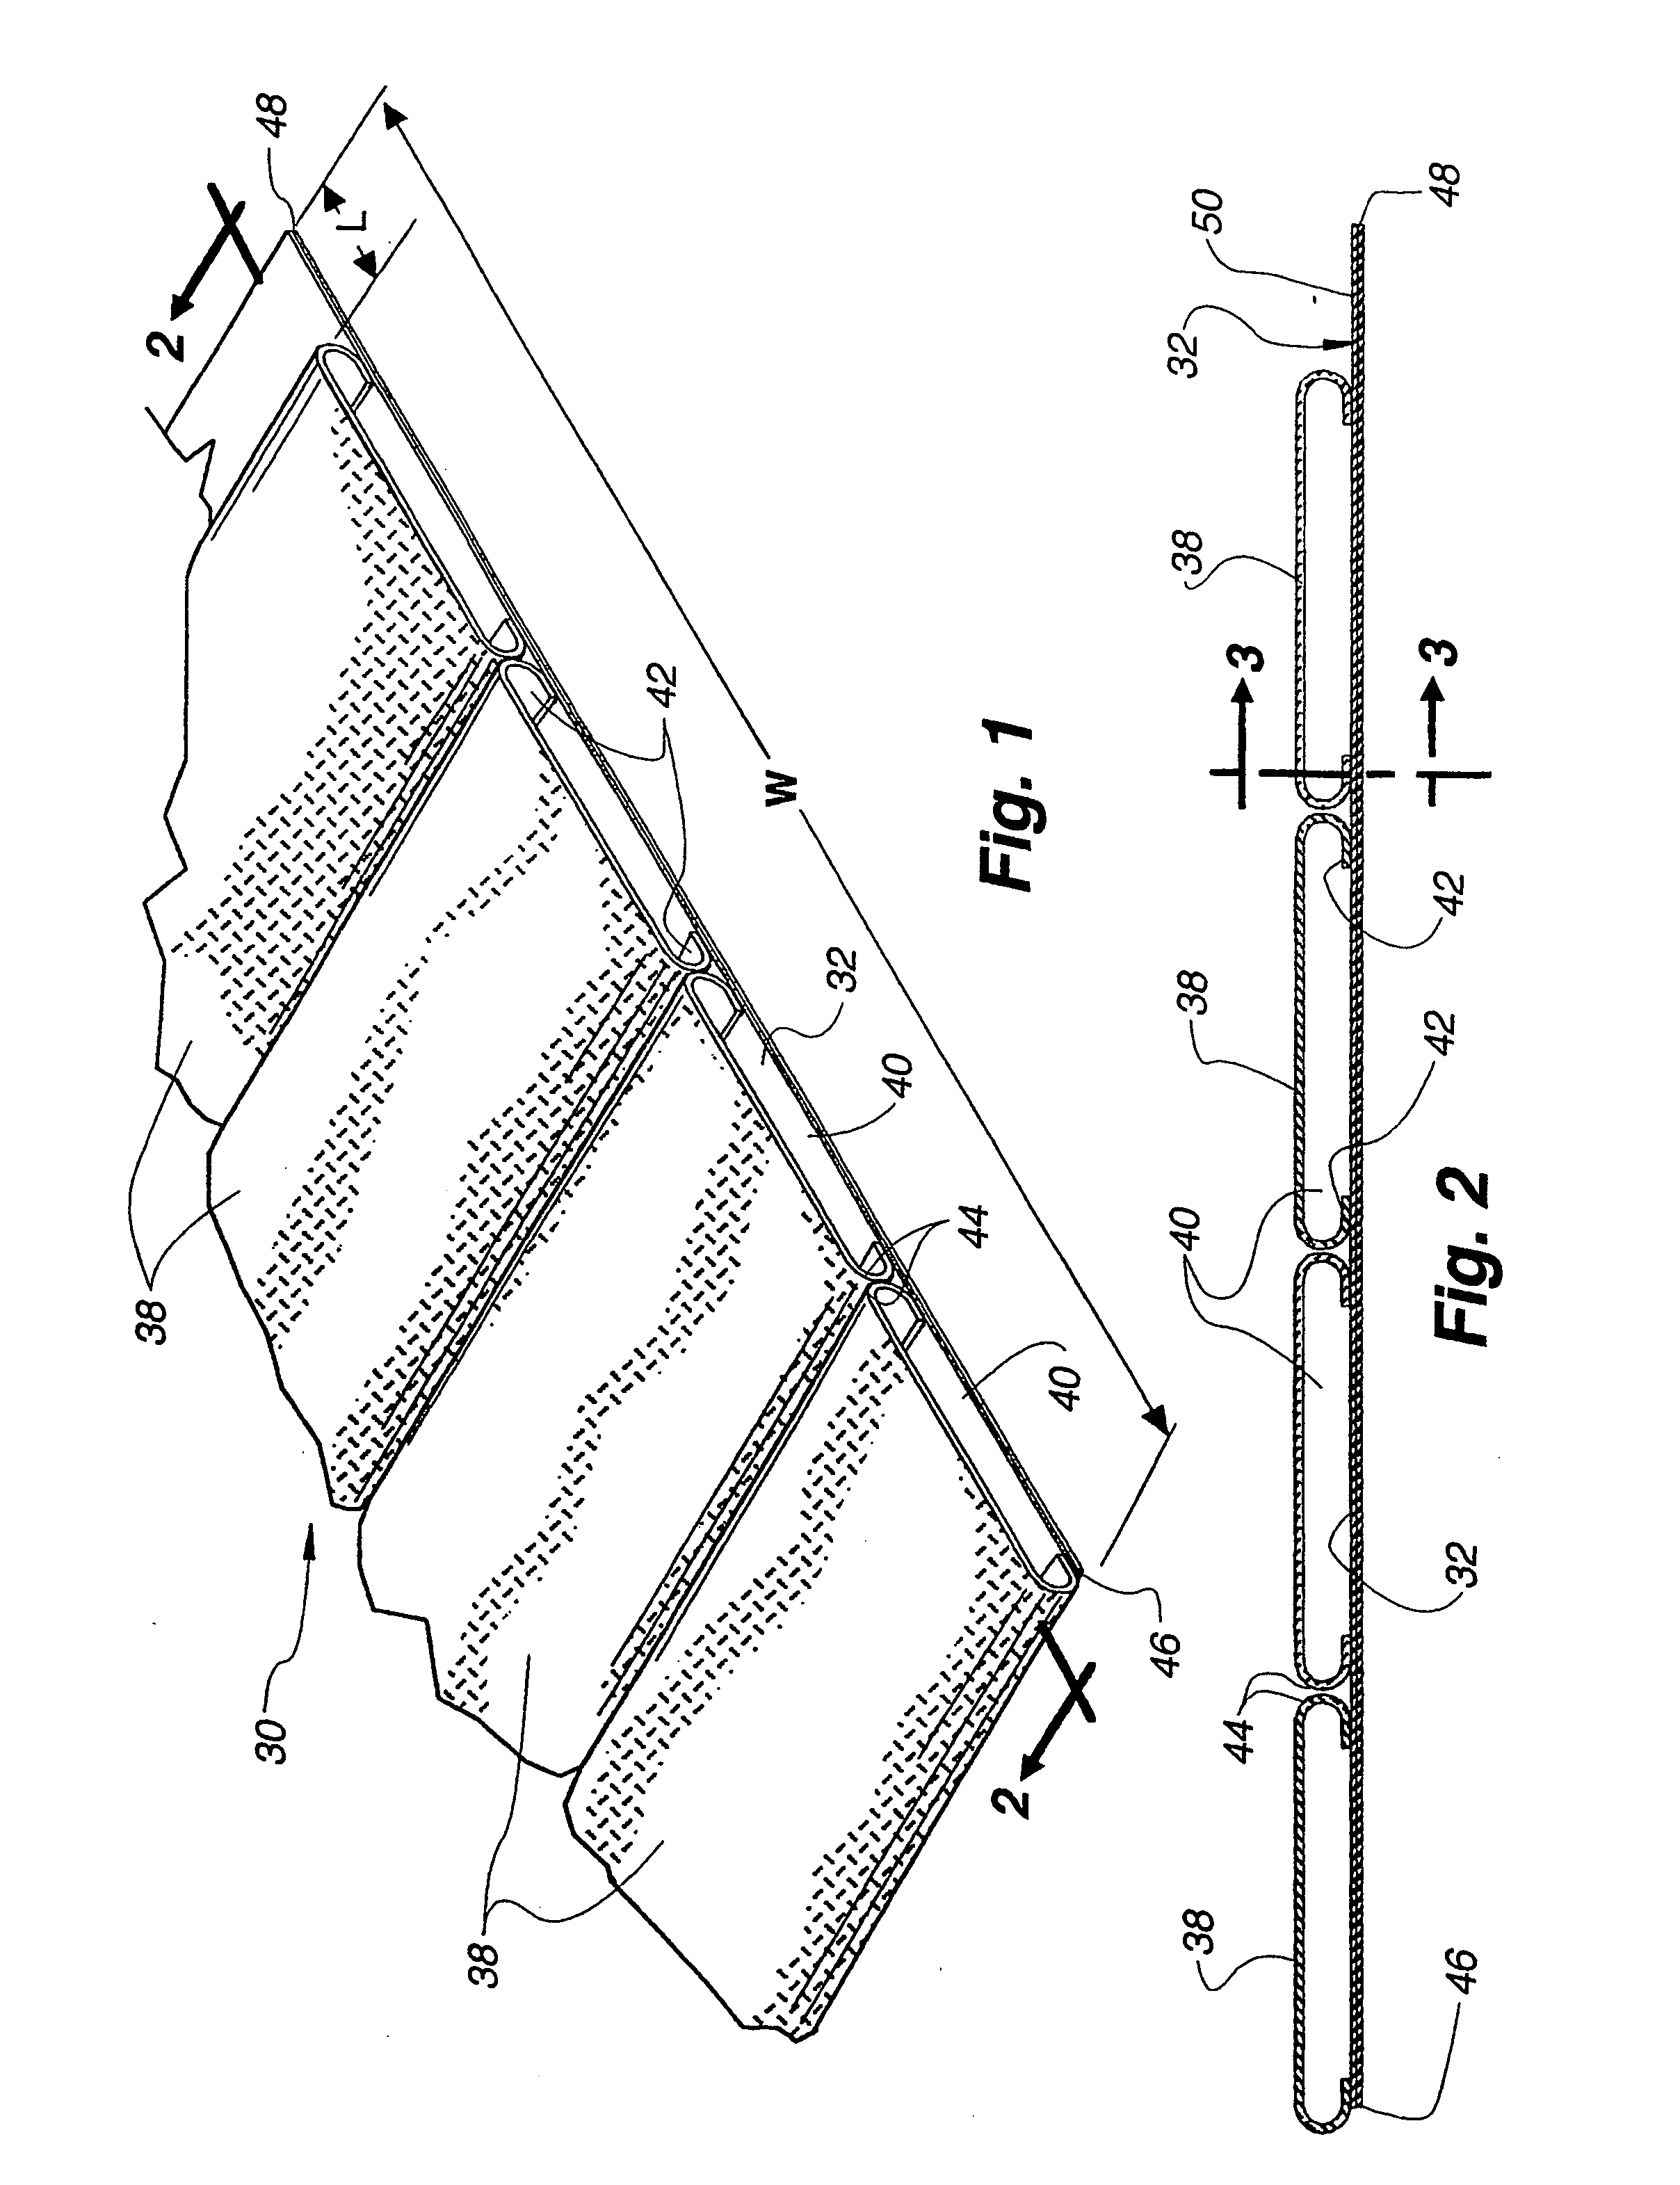 Covering for architectural surfaces and method of forming and applying same